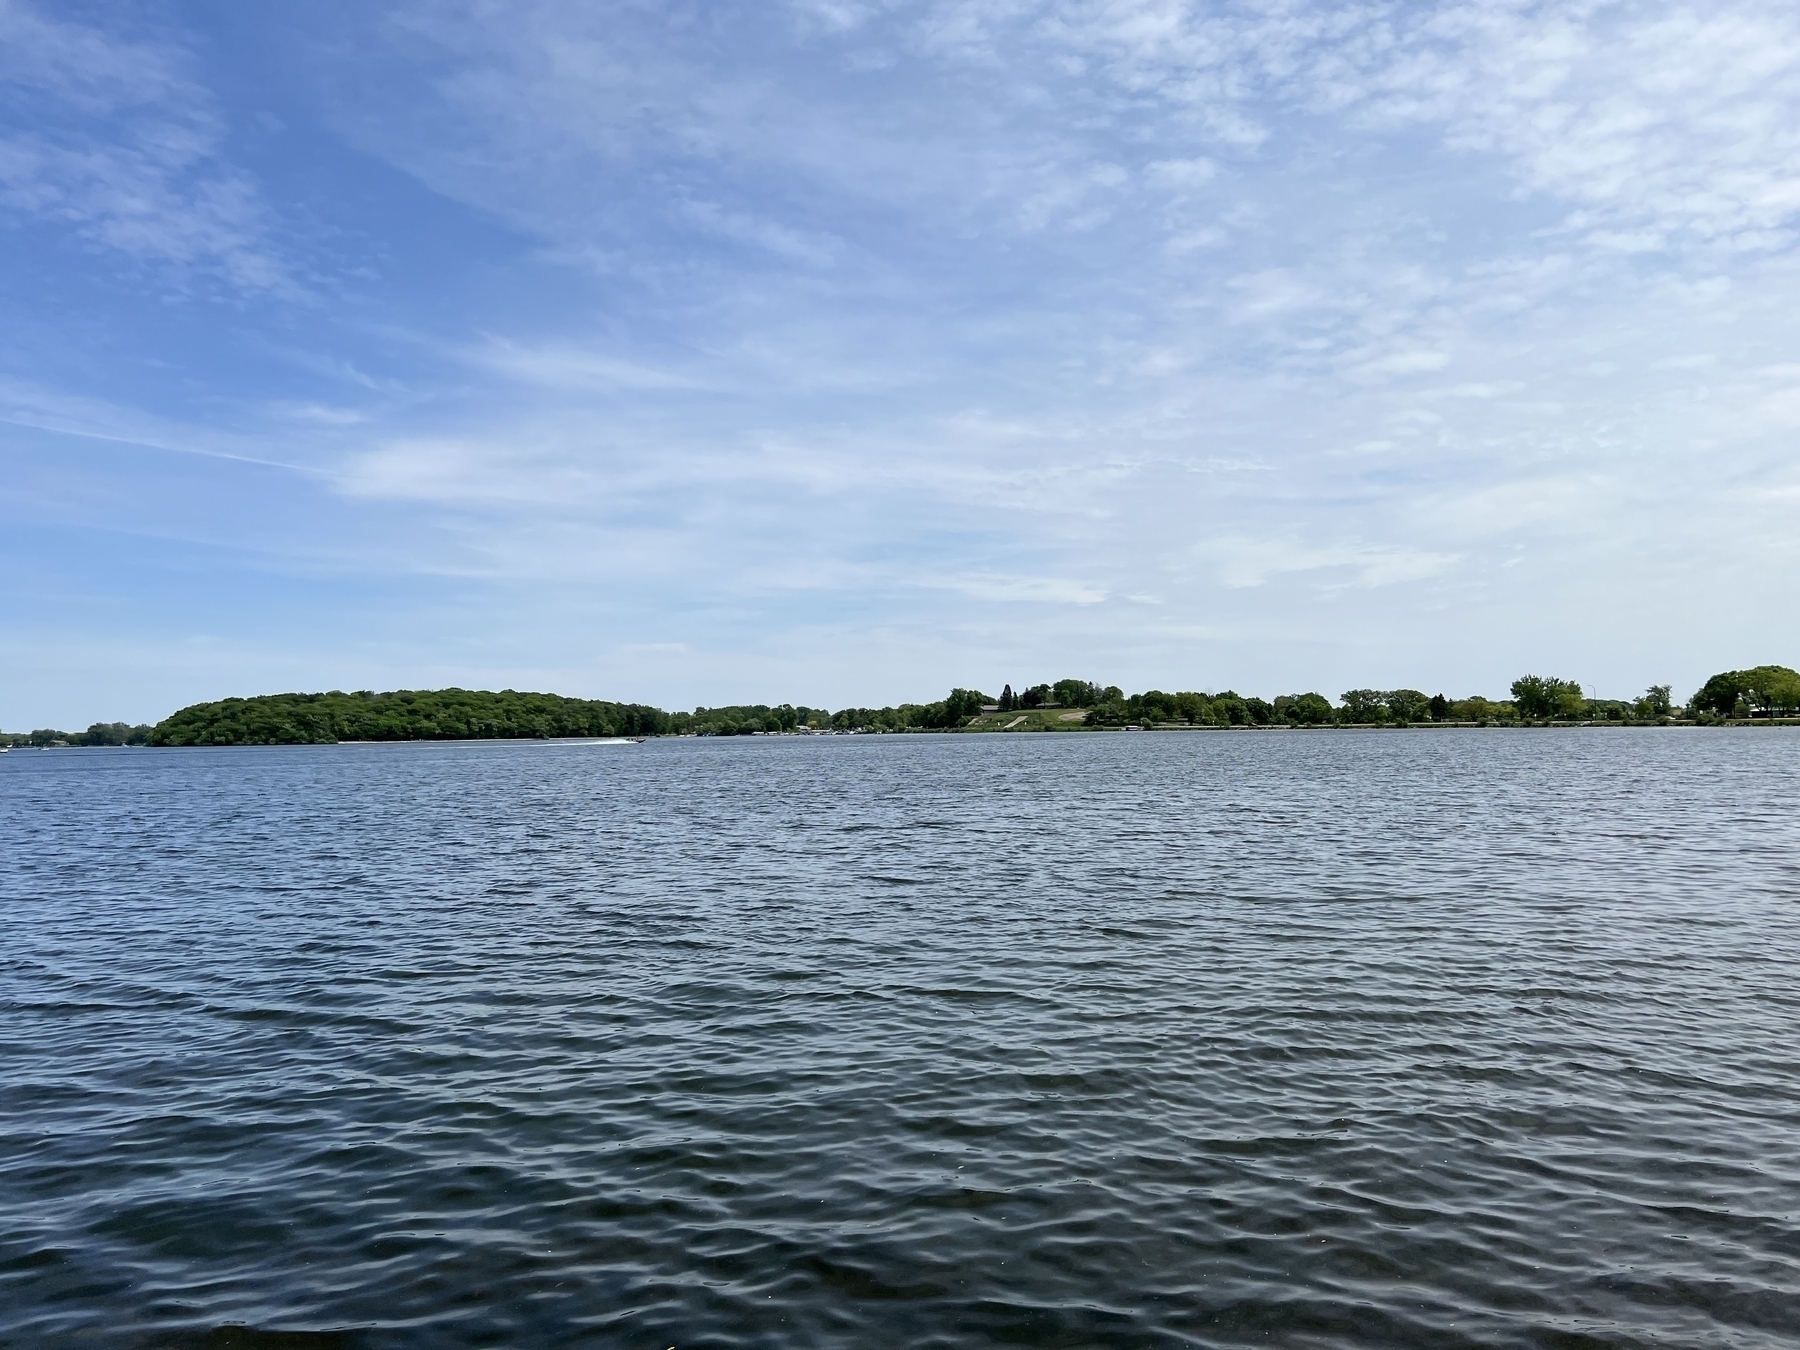 Calm water body resting under a partly cloudy sky with a forested hill on the distant horizon and scattered trees lining the shore.